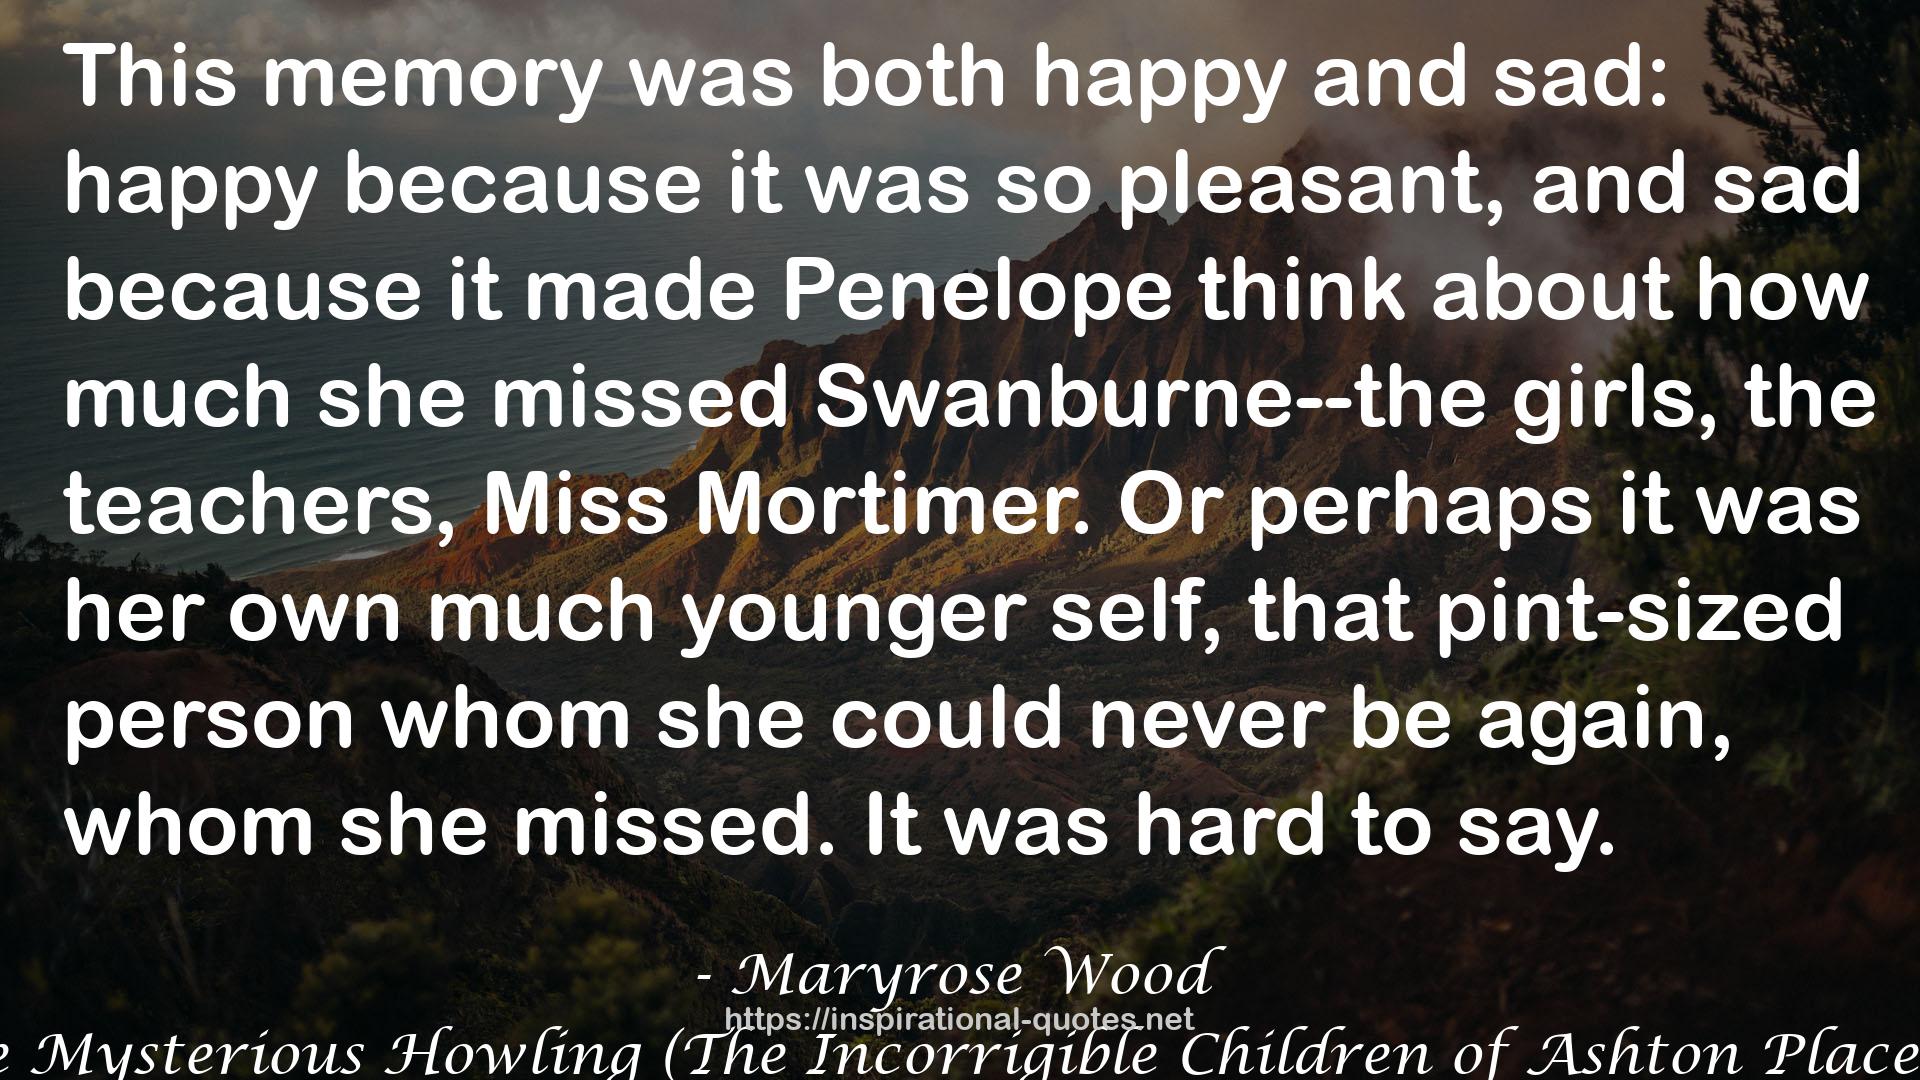 The Mysterious Howling (The Incorrigible Children of Ashton Place #1) QUOTES